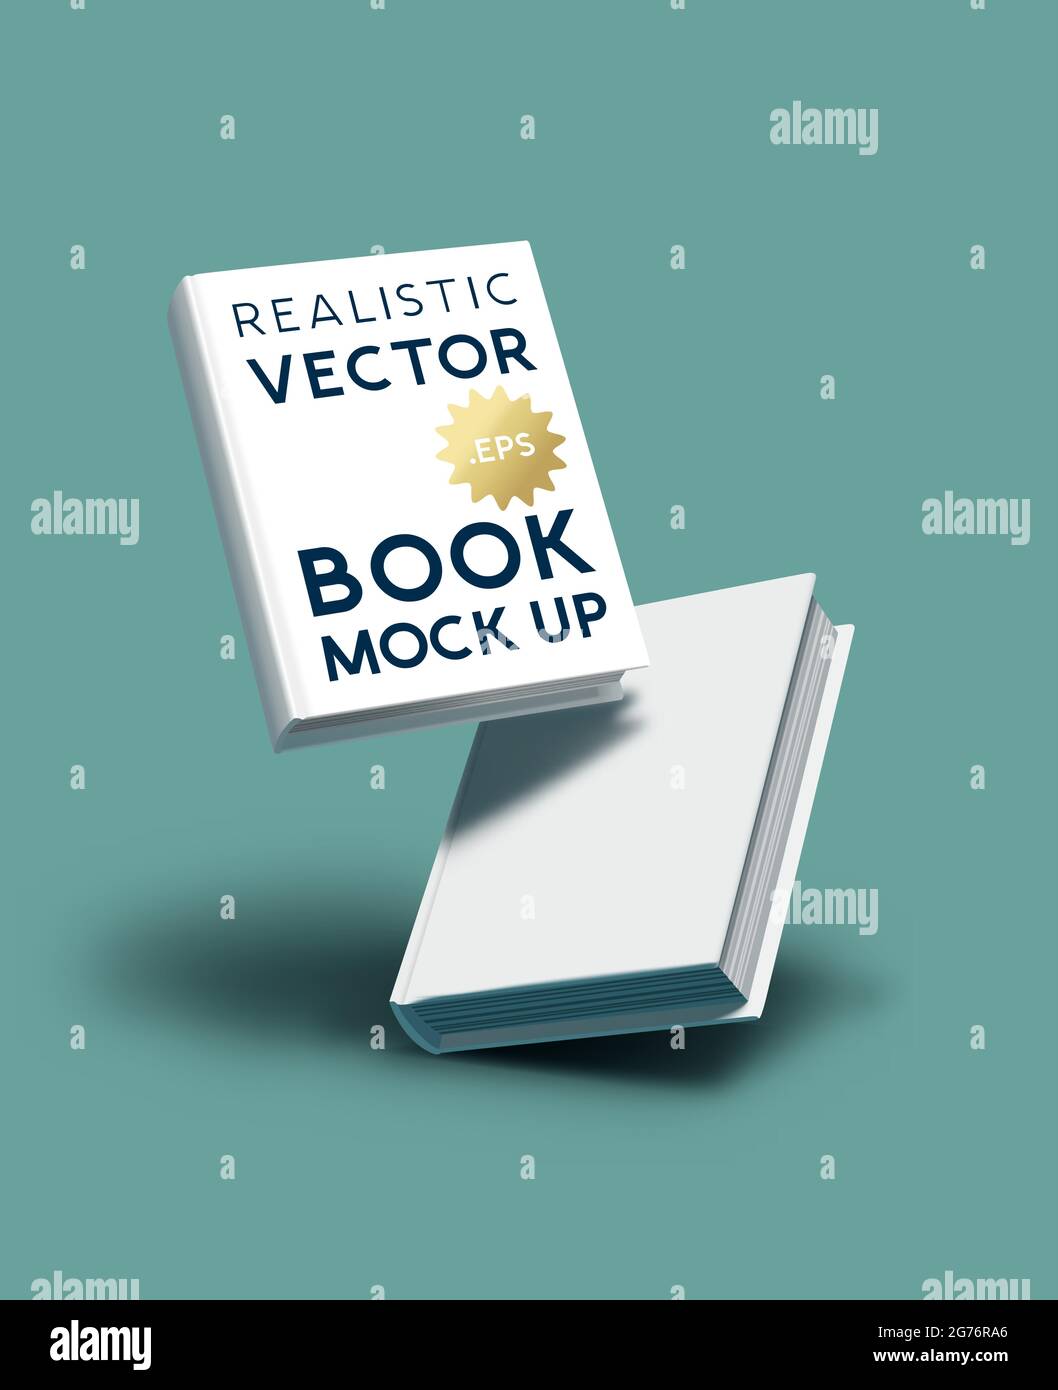 Blank realistic book cover mockup - e-book and marketing template vector illustration. Stock Vector